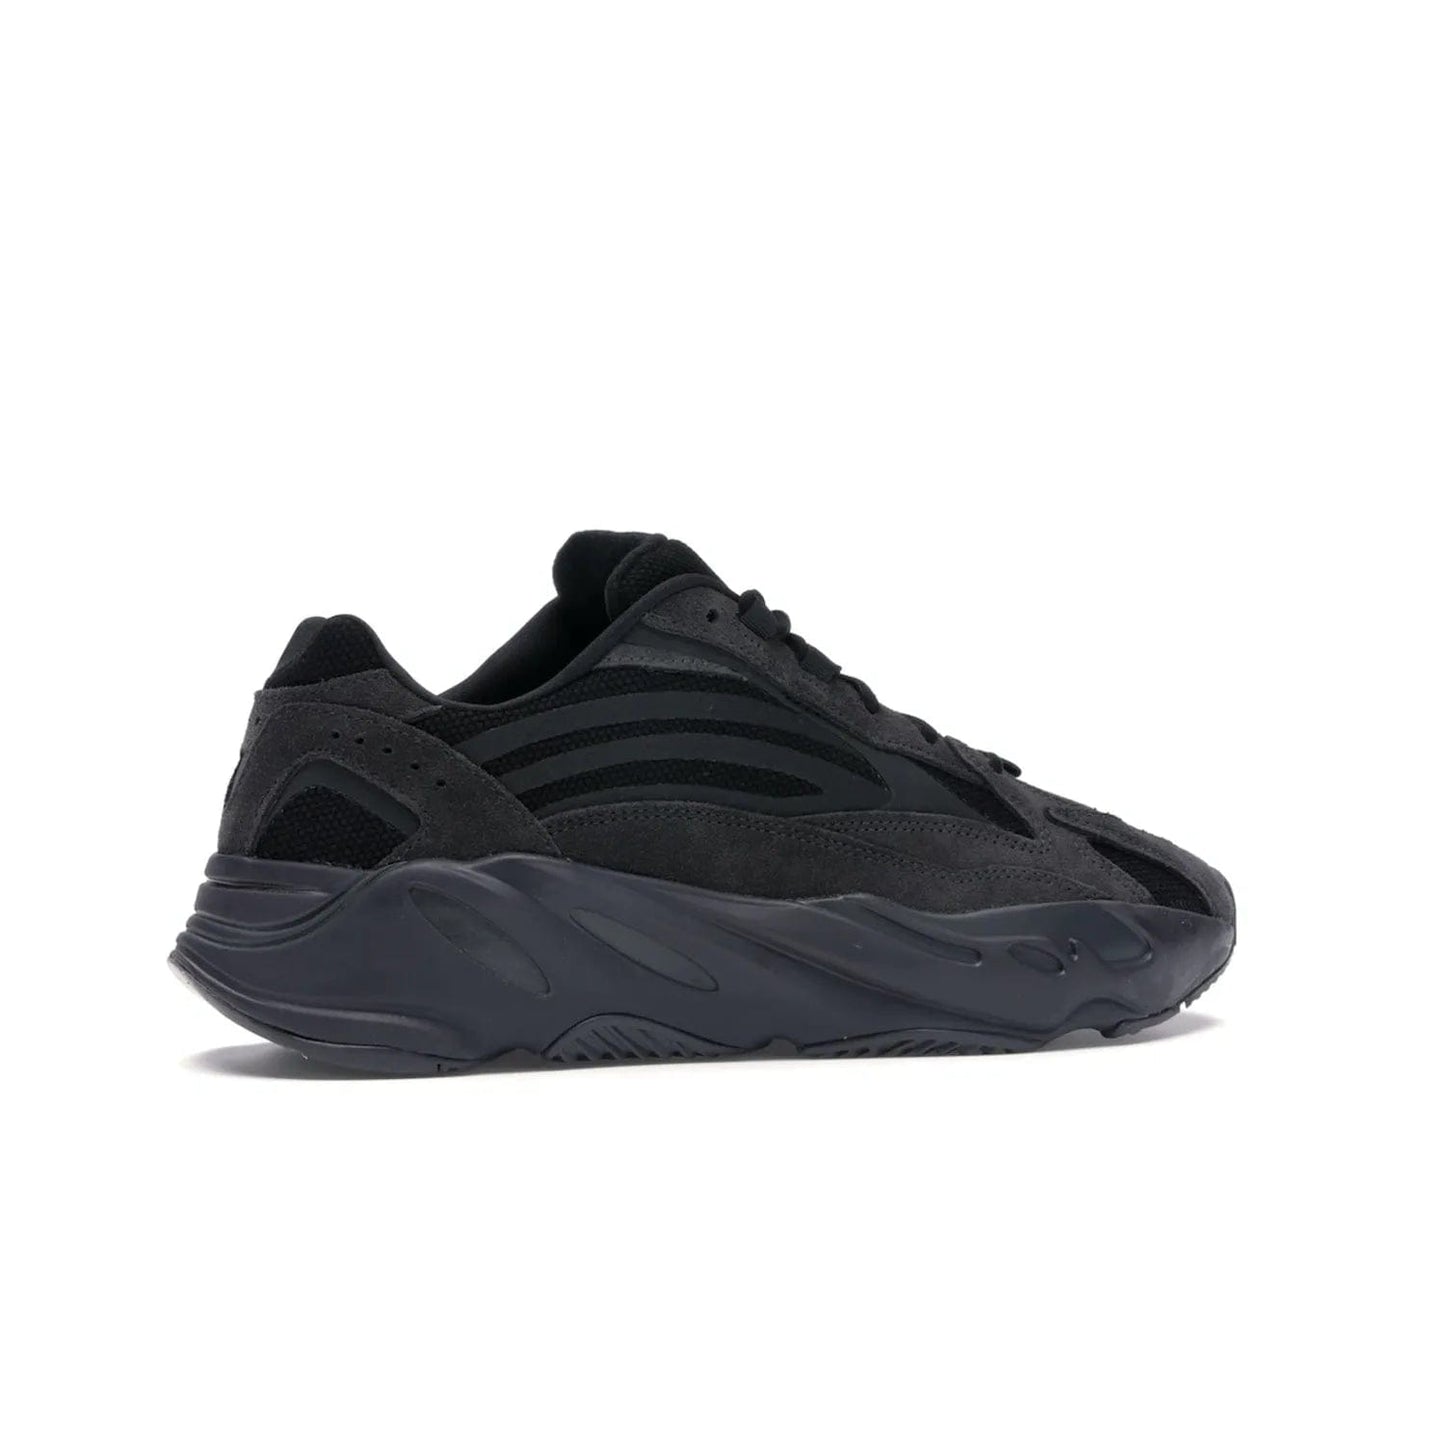 adidas Yeezy Boost 700 V2 Vanta - Image 35 - Only at www.BallersClubKickz.com - Introducing the adidas Yeezy Boost 700 V2 Vanta - a sleek and stylish all-black design featuring a combination of mesh, leather, and suede construction with signature Boost cushioning in the sole. The ultimate in comfort and support.